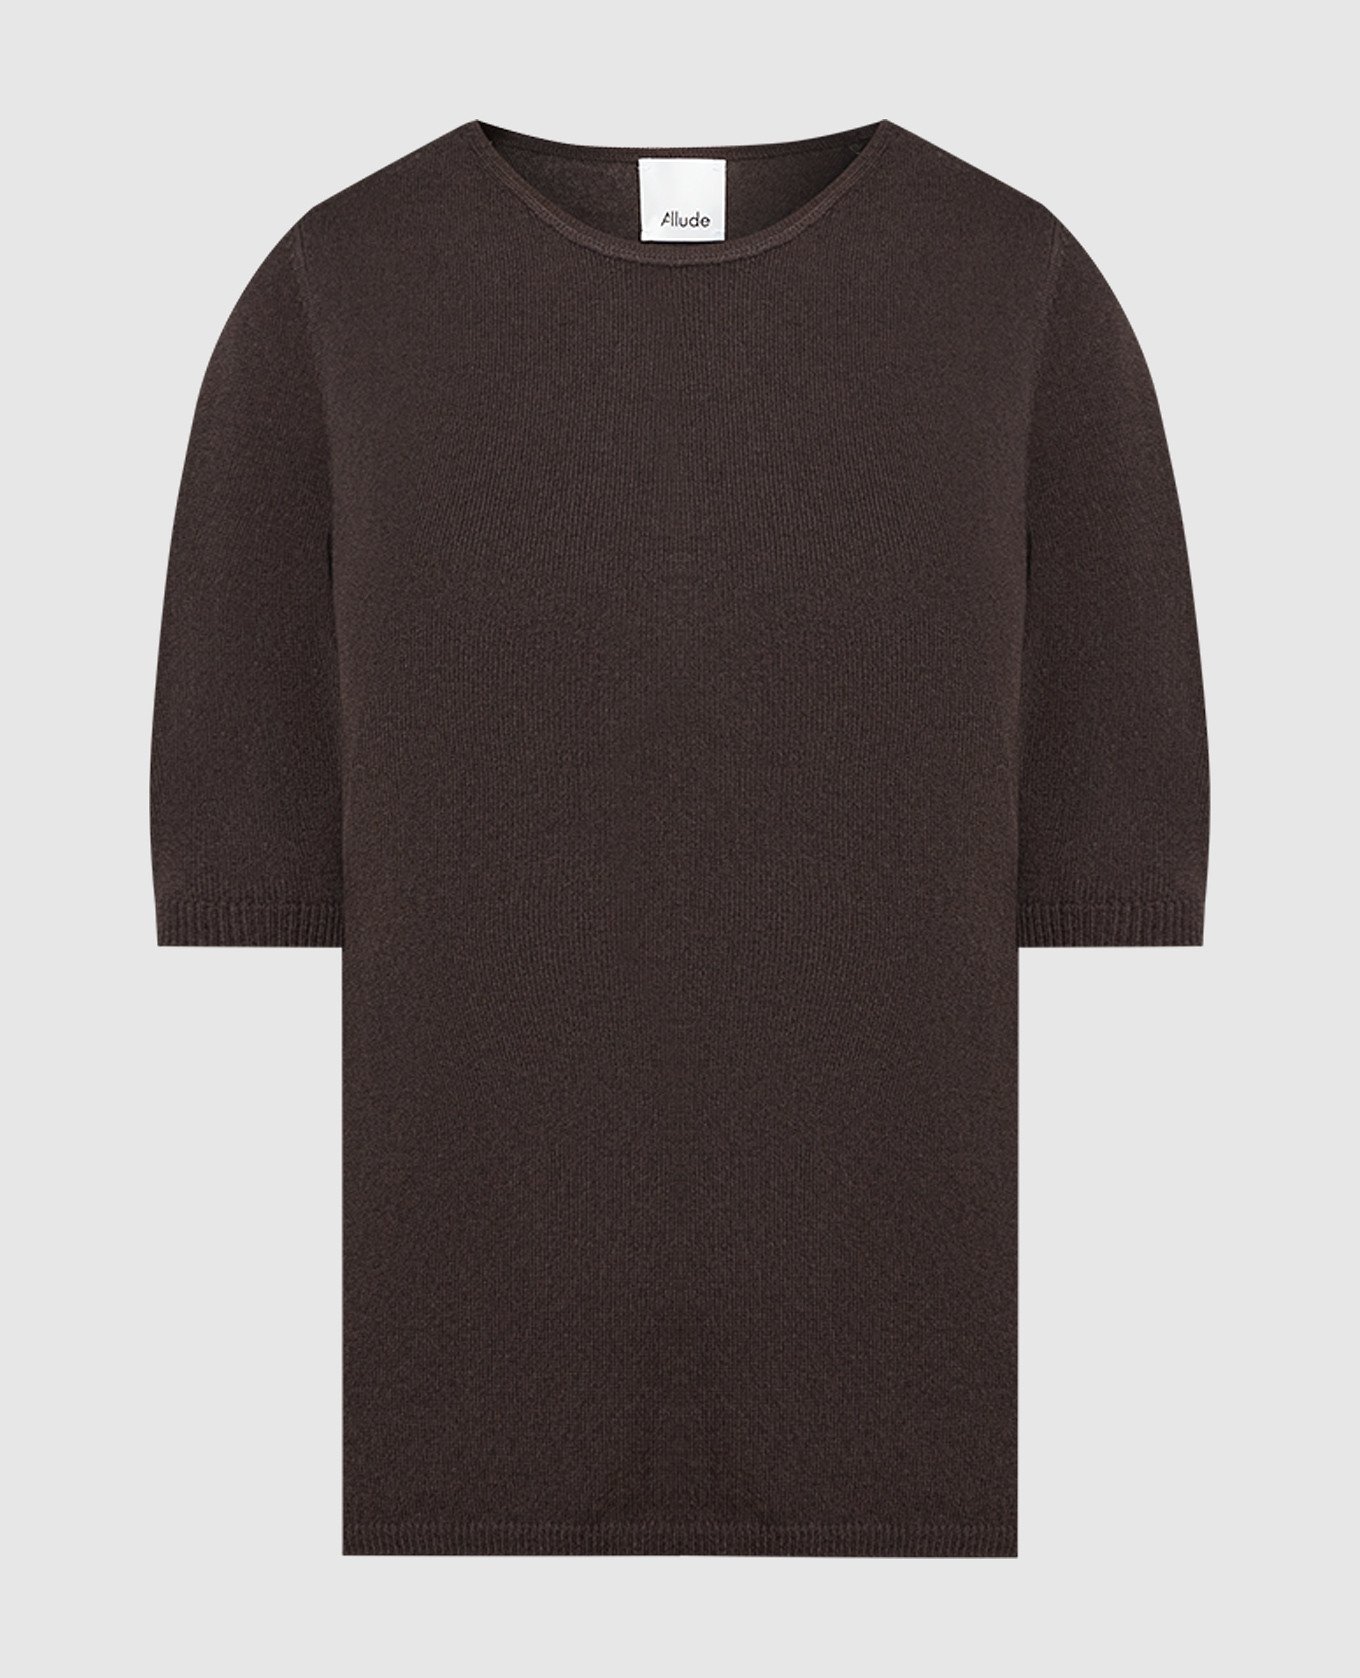 Brown wool and cashmere jumper